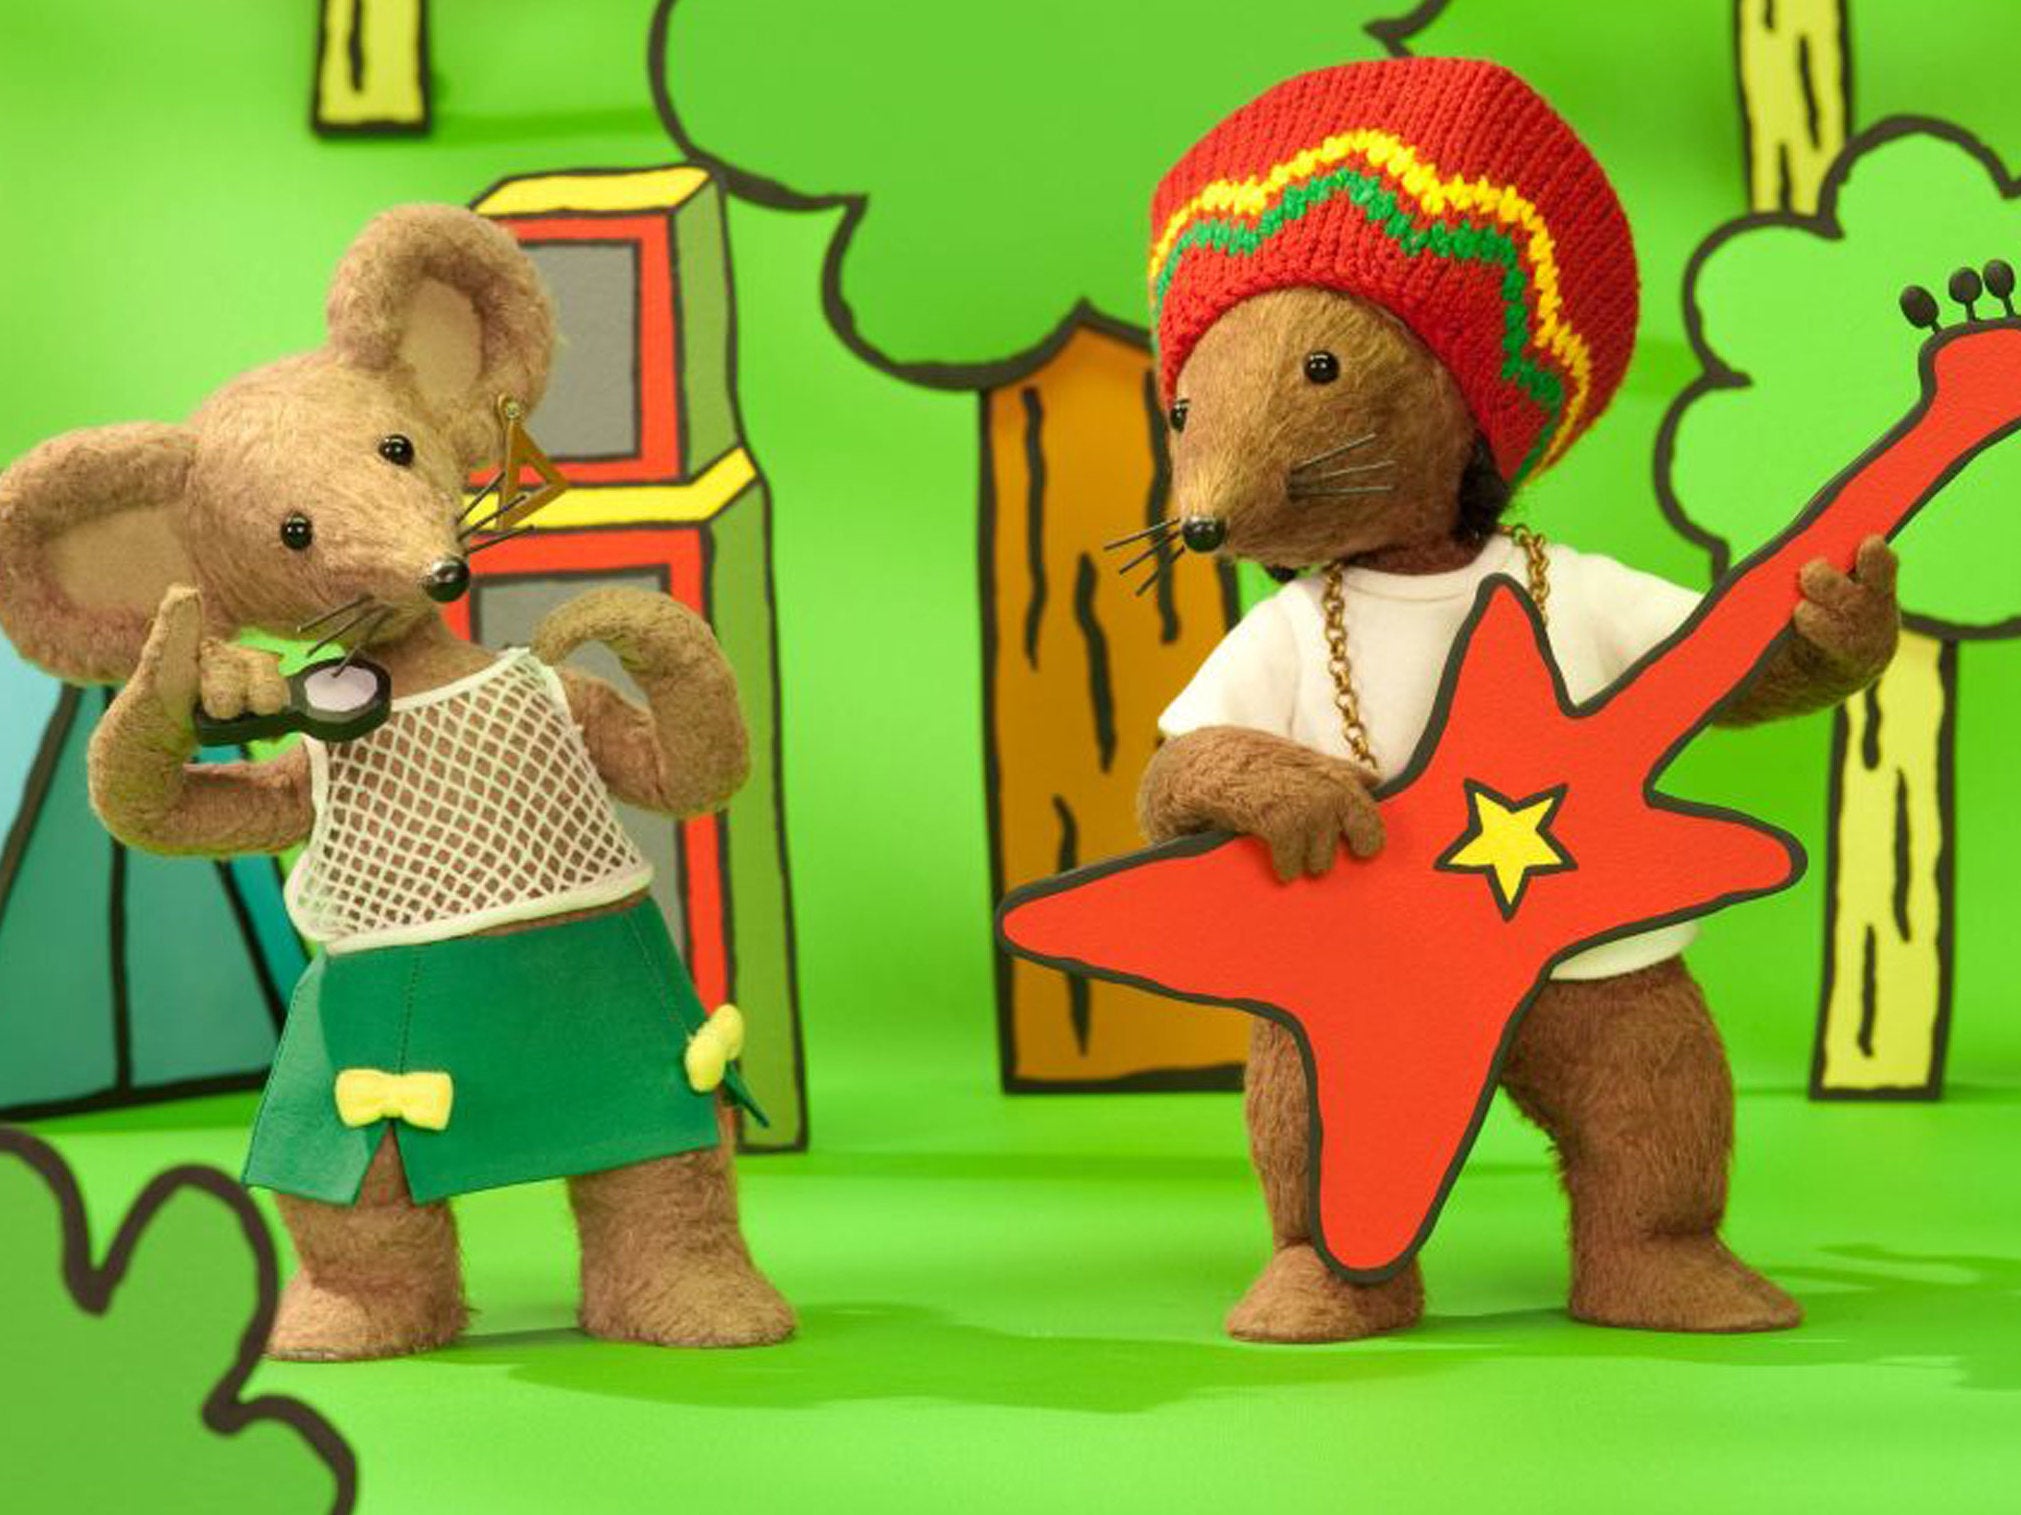 Rastamouse - part of the 'golden age' for the creative industries